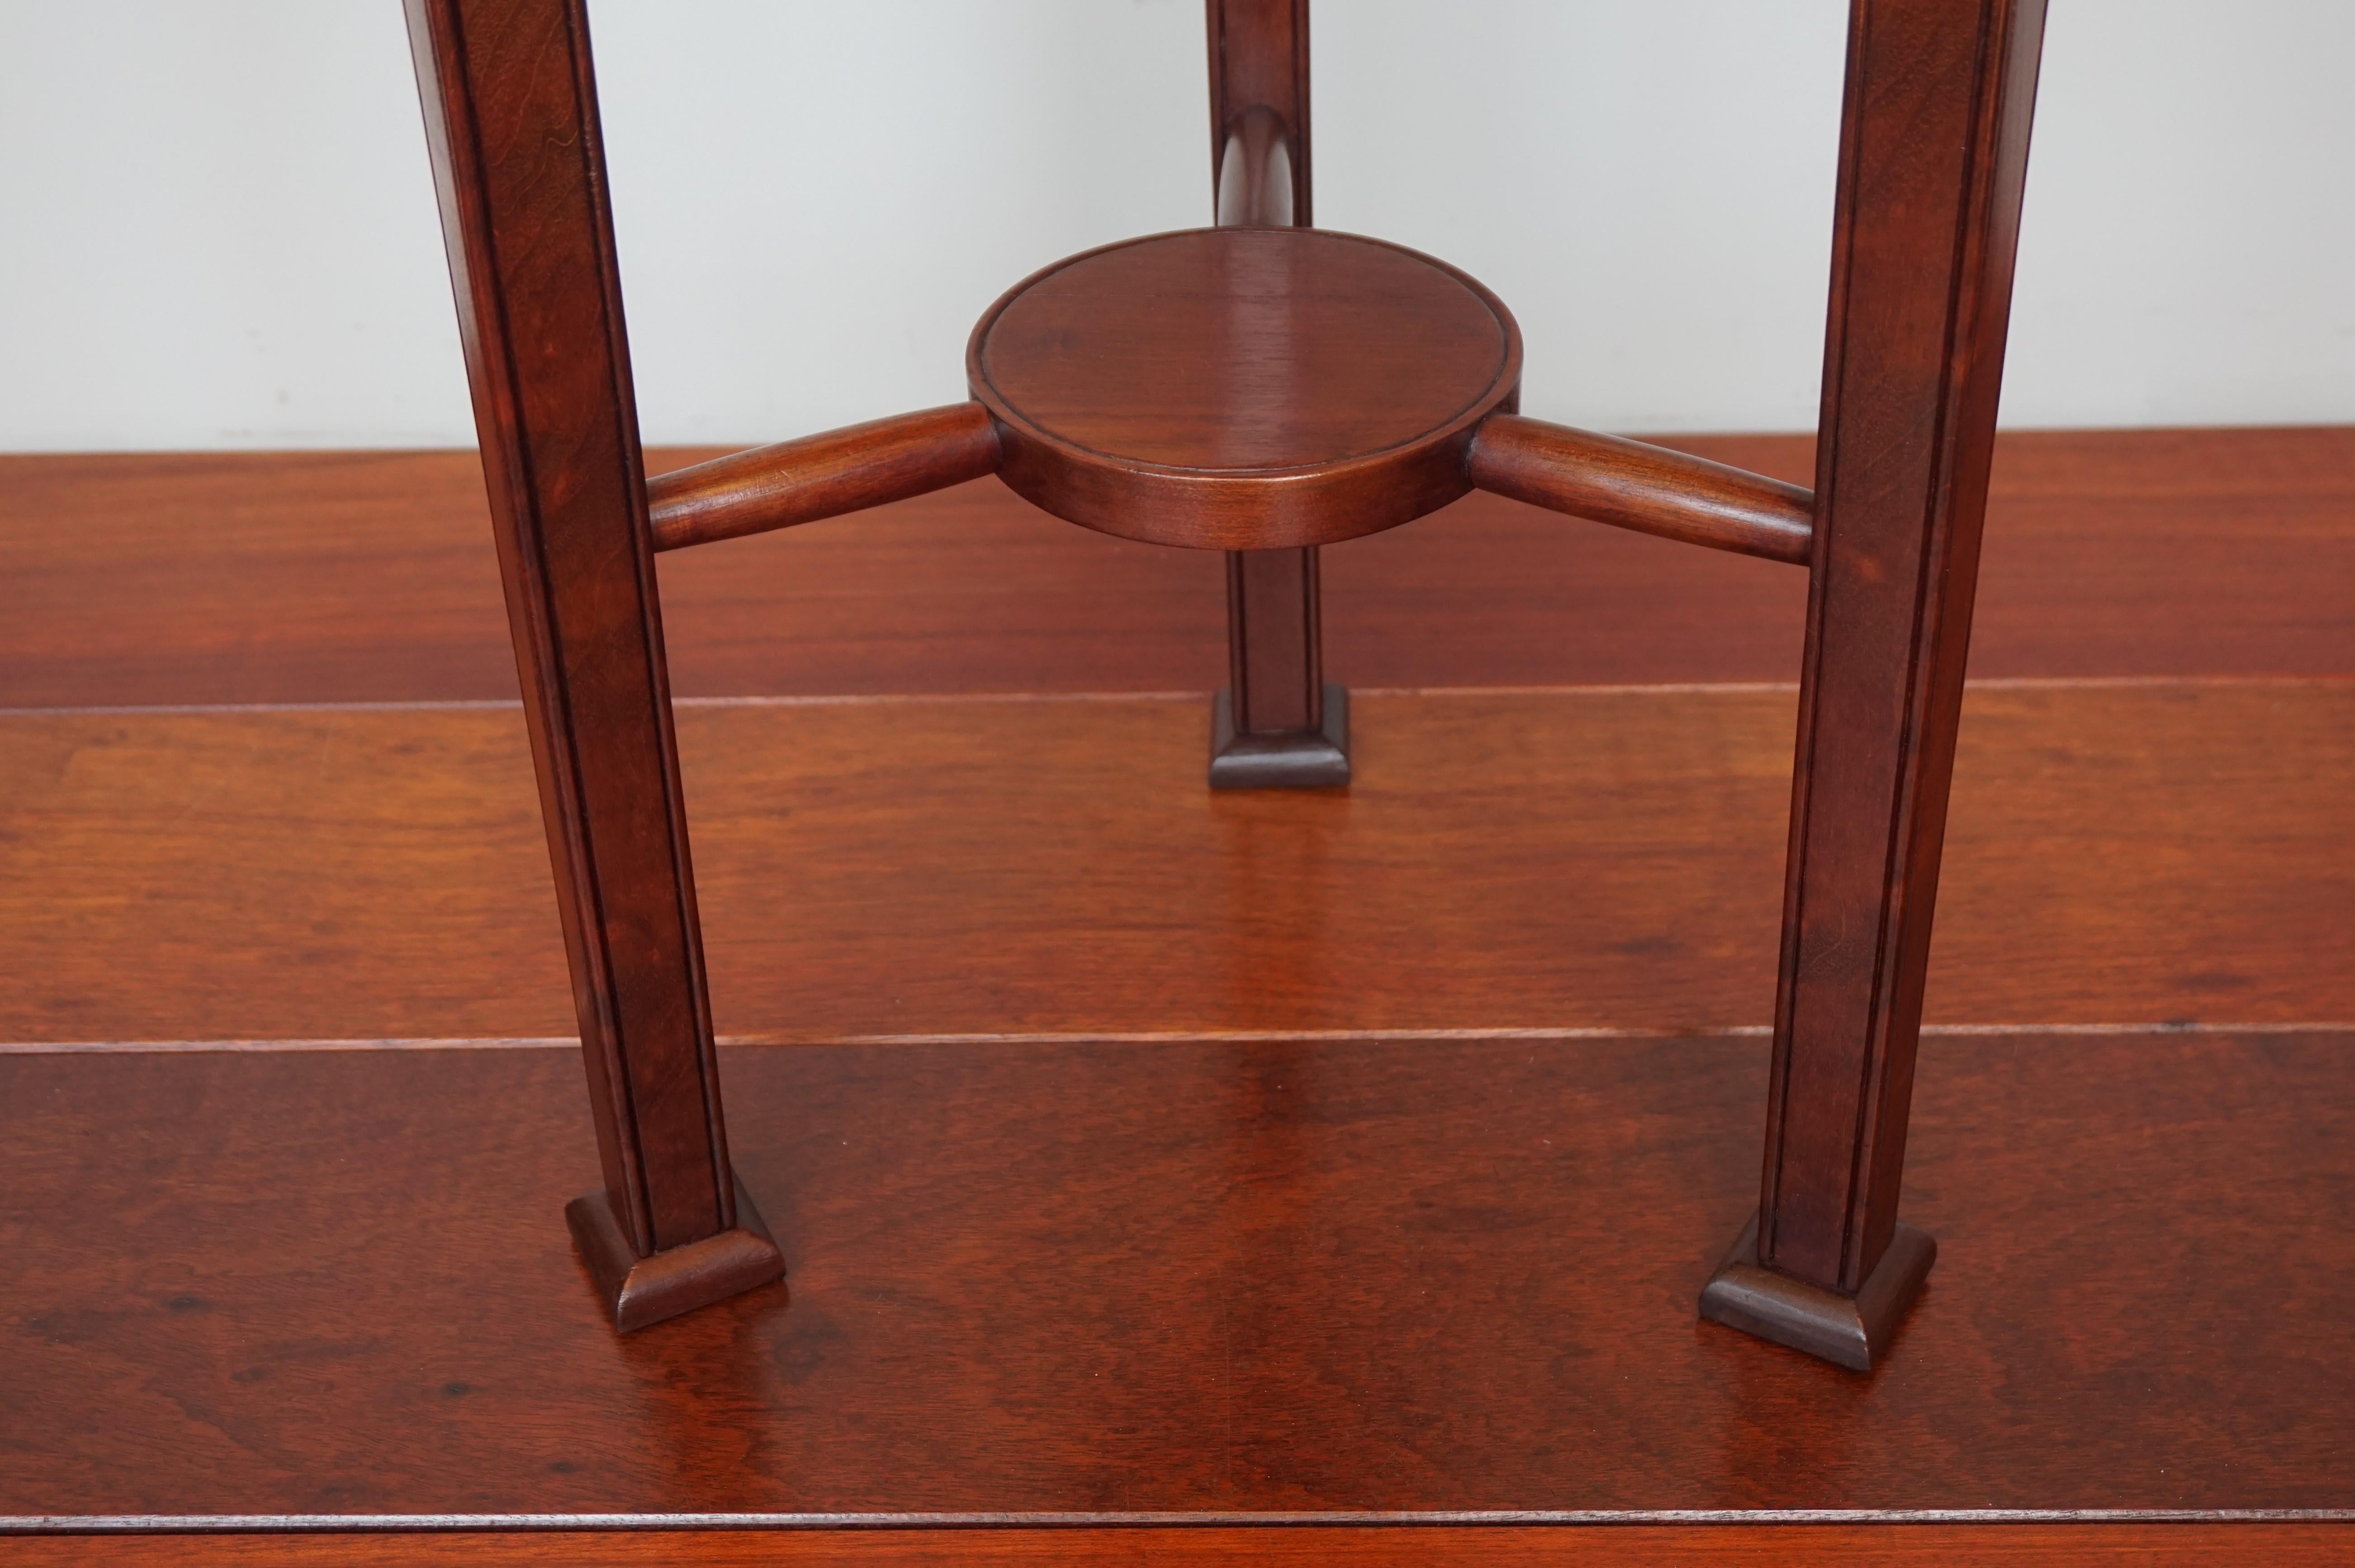 Hand-Crafted Wonderful Solid Mahogany Art Deco Pedestal Table and Sculpture Stand circa 1920